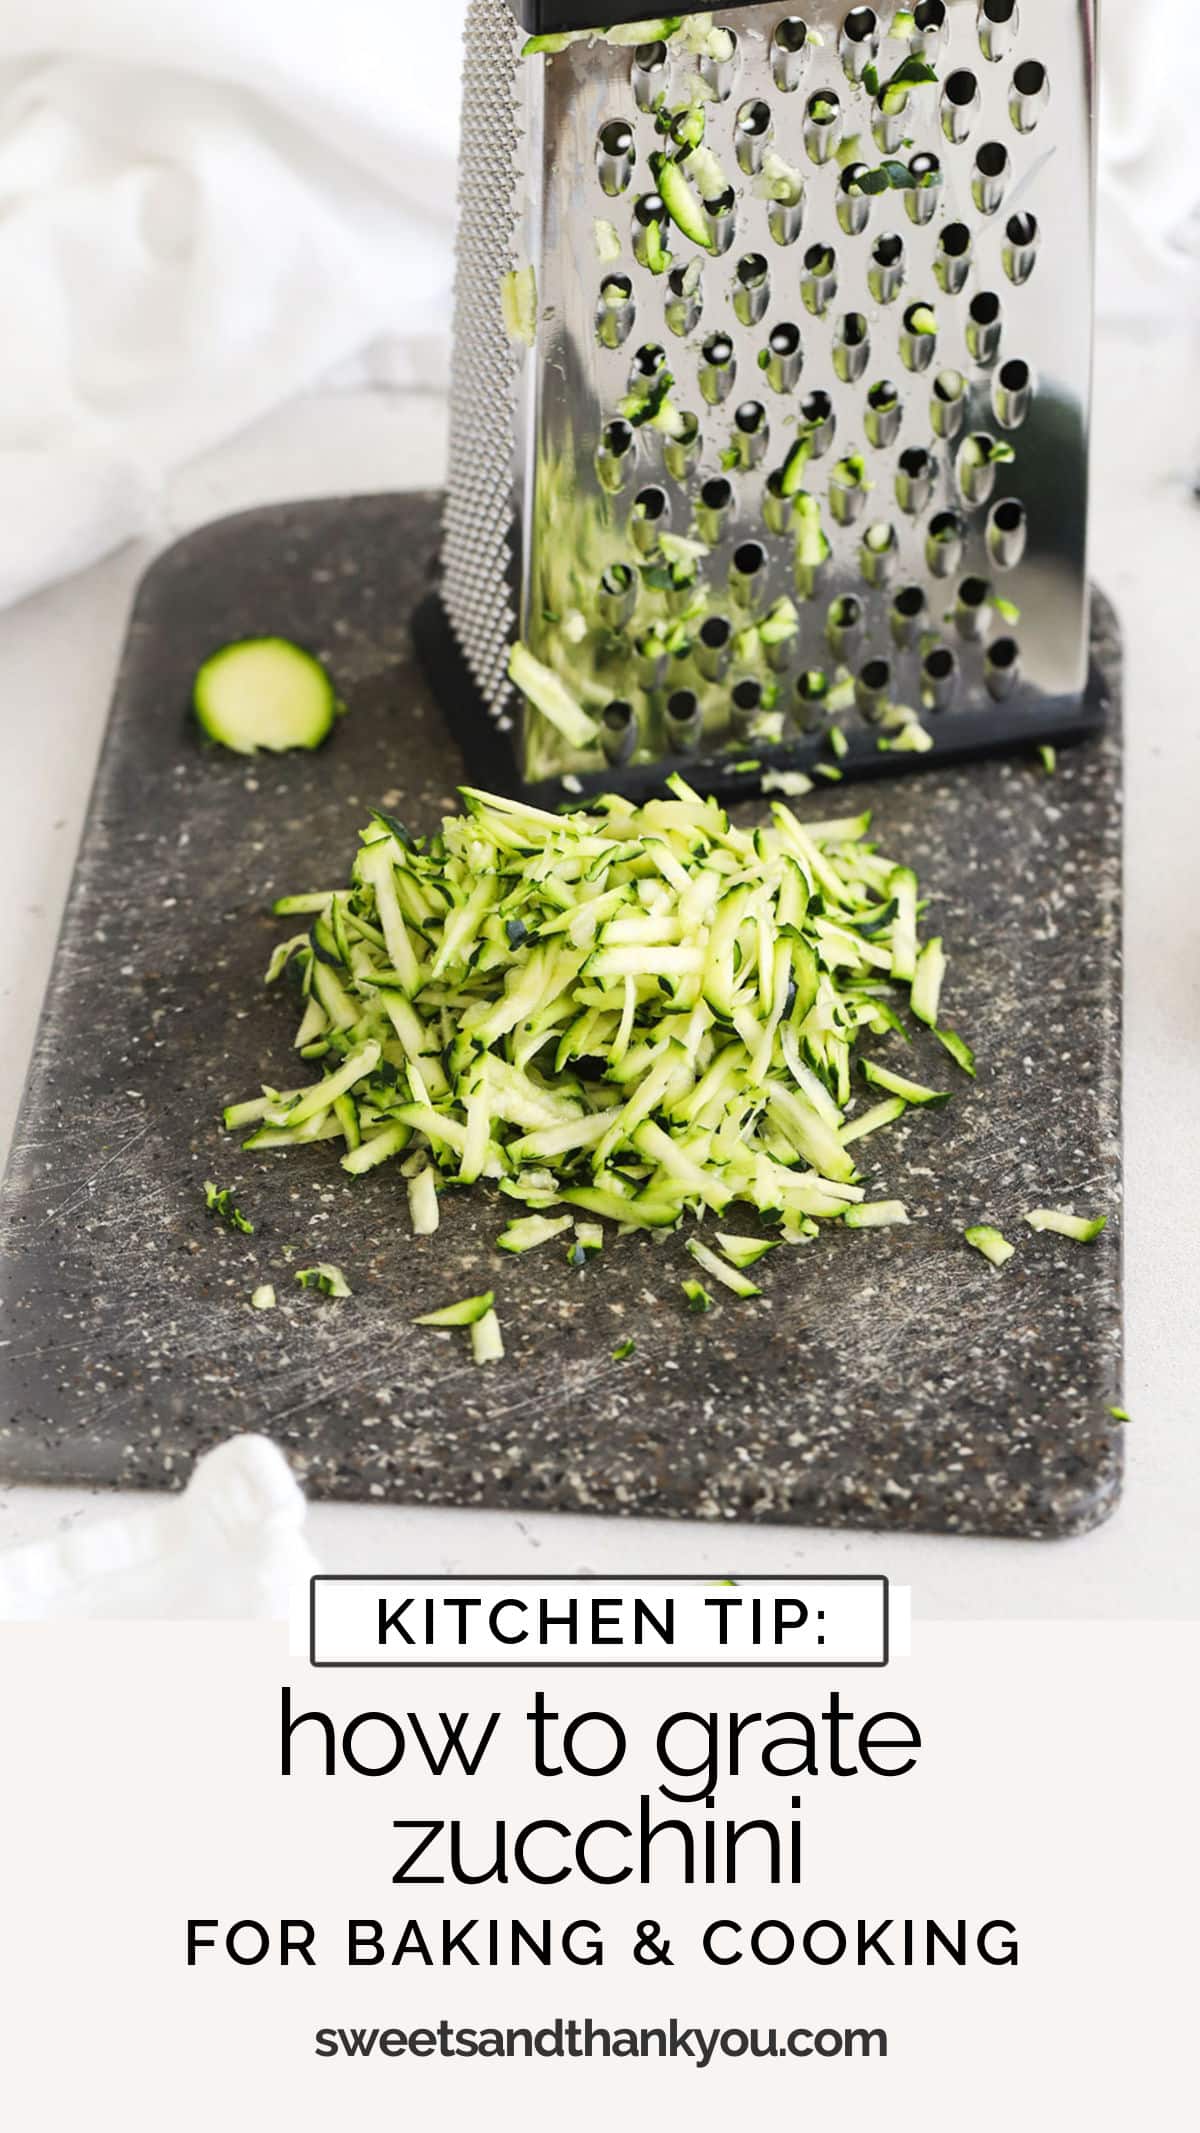 Learn how to grate zucchini for baking zucchini bread & cake, making meatballs & more with this easy tutorial. (+10 zucchini recipes to try!) / grated zucchini recipes / how to shred zucchini for baking / how to squeeze excess liquid out of zucchini / how to grate zucchini without a food processor / how to shred zucchini with a box grater / how to grate zucchini for zucchini bread / gluten free zucchini recipes